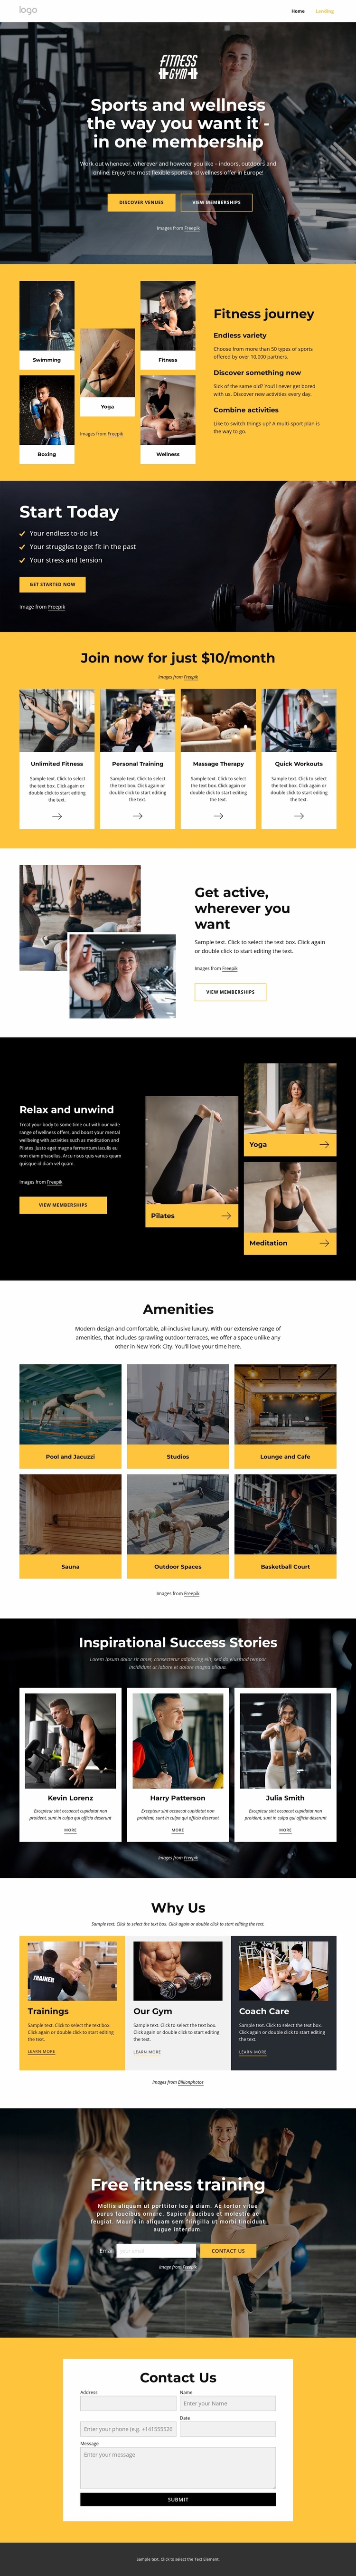 Gym, swimming, fitness classes Ecommerce Website Design